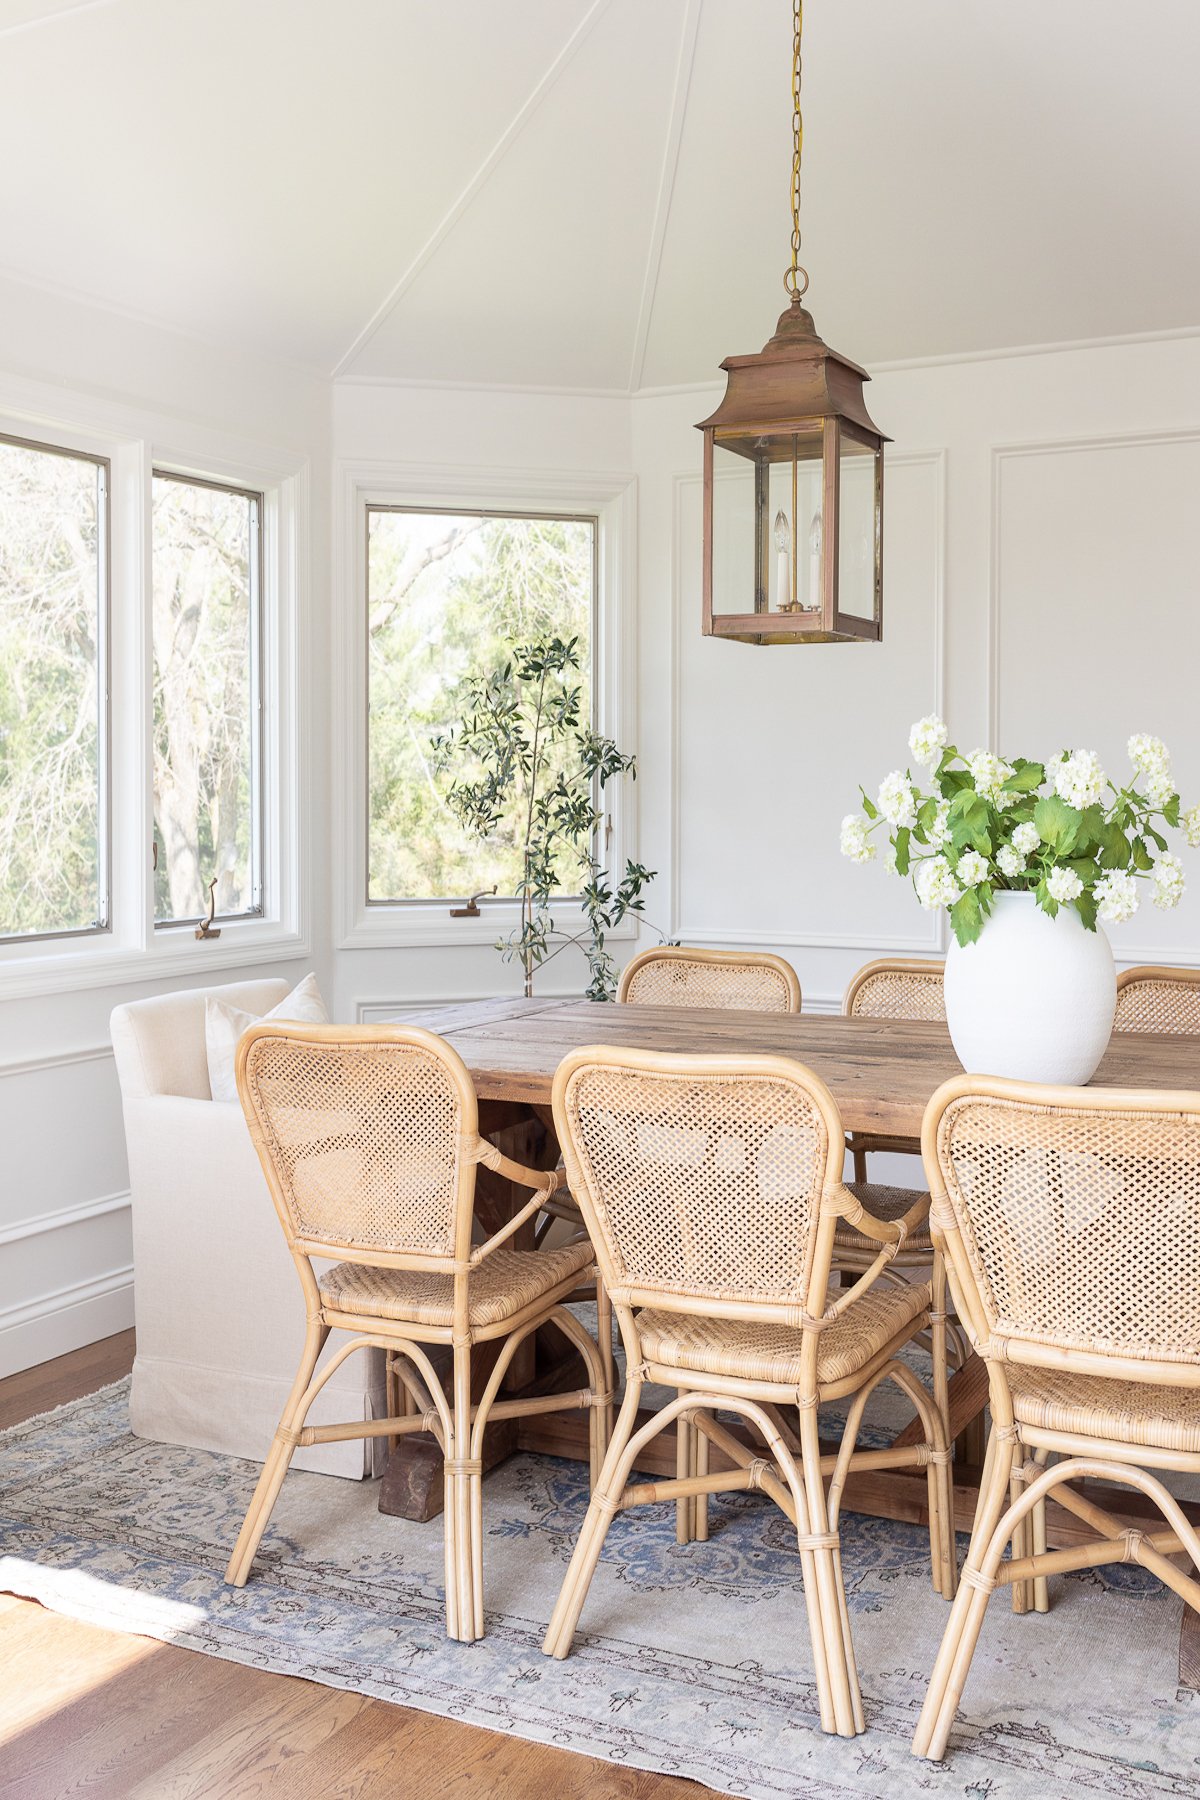 A white dining room with a wicker table and chairs featuring an indoor olive tree.